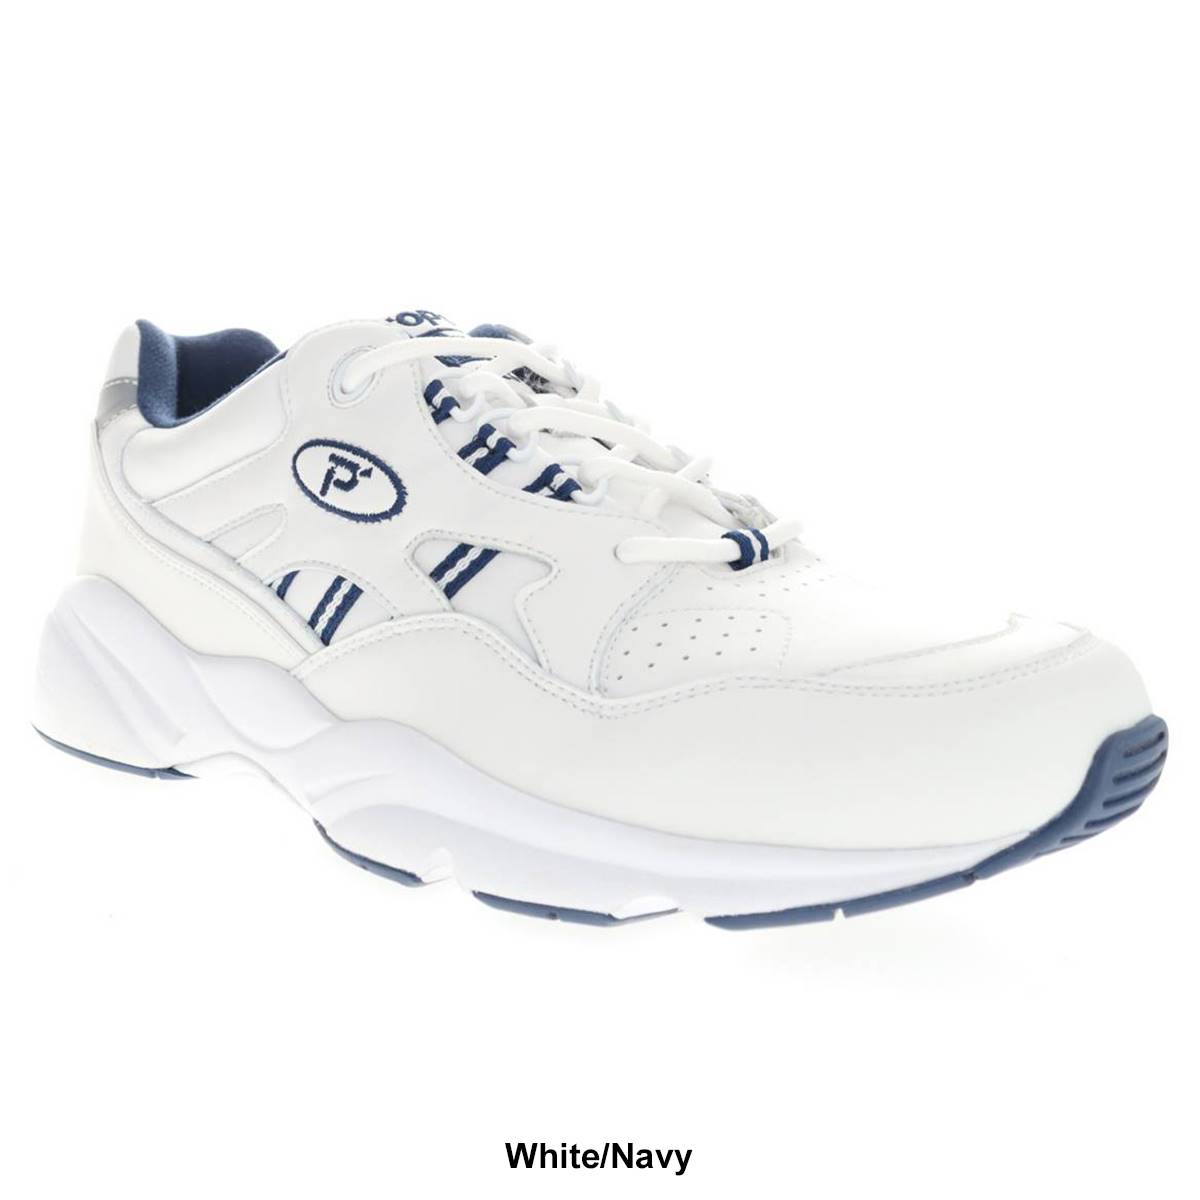 Mens Propet(R) Stability Walker Athletic Sneakers